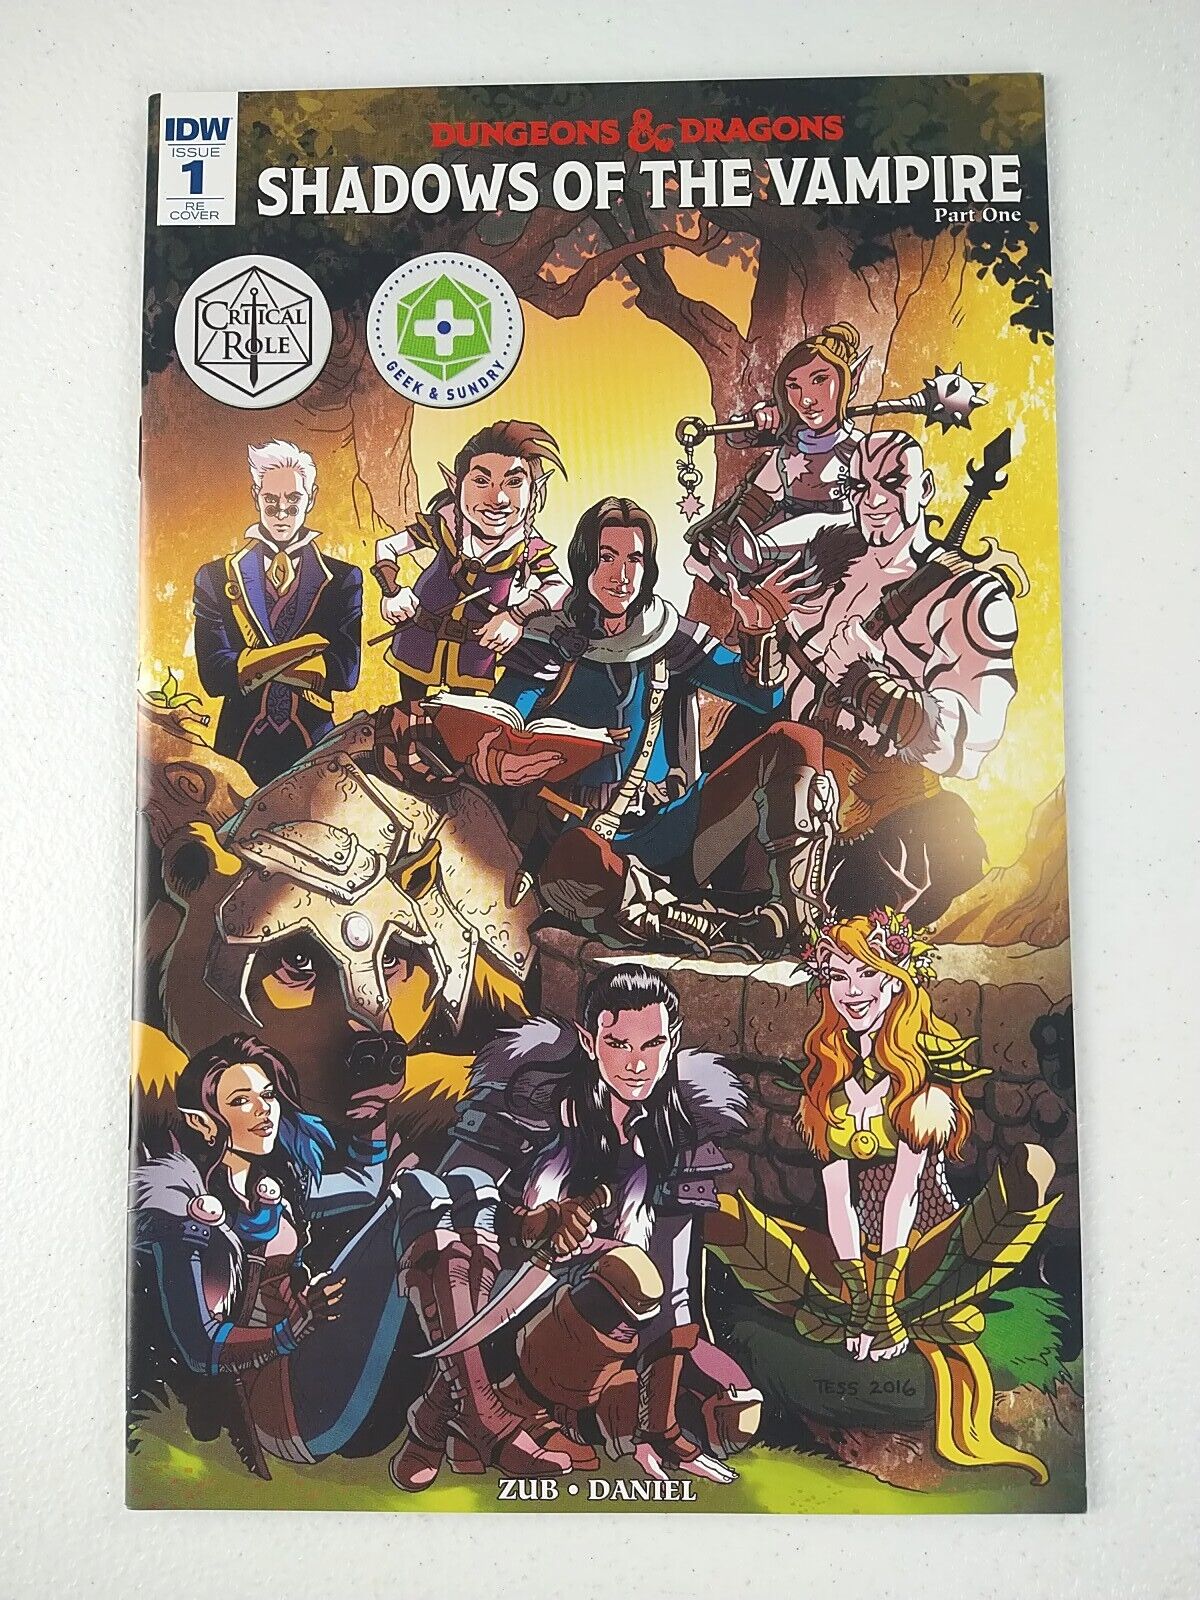 Dungeons & Dragons #1 Shadows of the Vampire 2016 Critical Role 1st Vox Machina